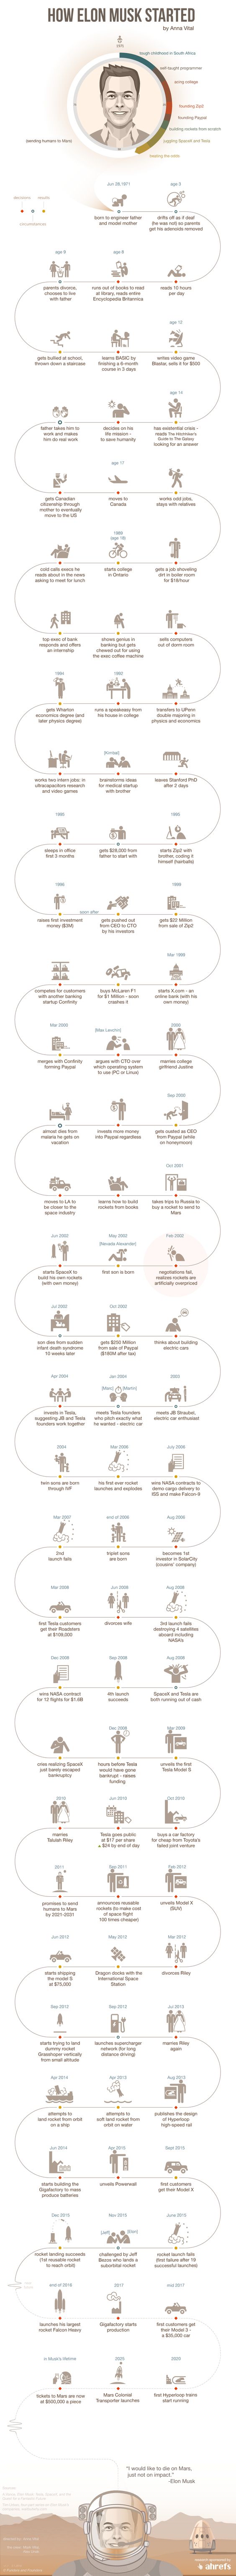 How Elon Musk started visualized by @Anna Vital